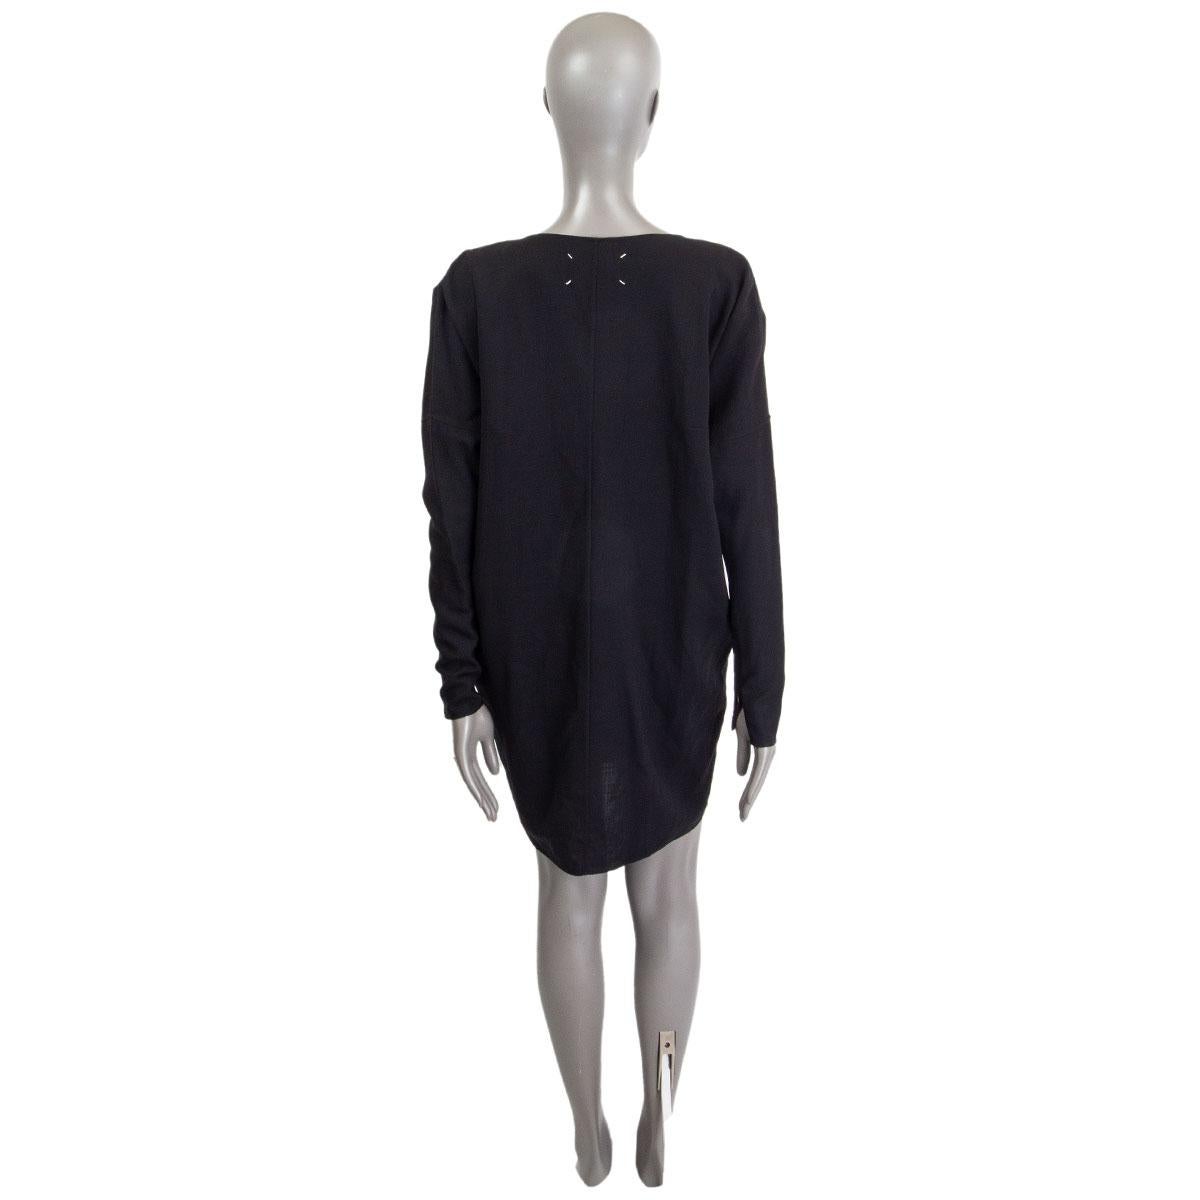 MAISON MARTIN MARGIELA black wool DRAPED NECK Long Sleeve Blouse Dress 38 S In Excellent Condition For Sale In Zürich, CH